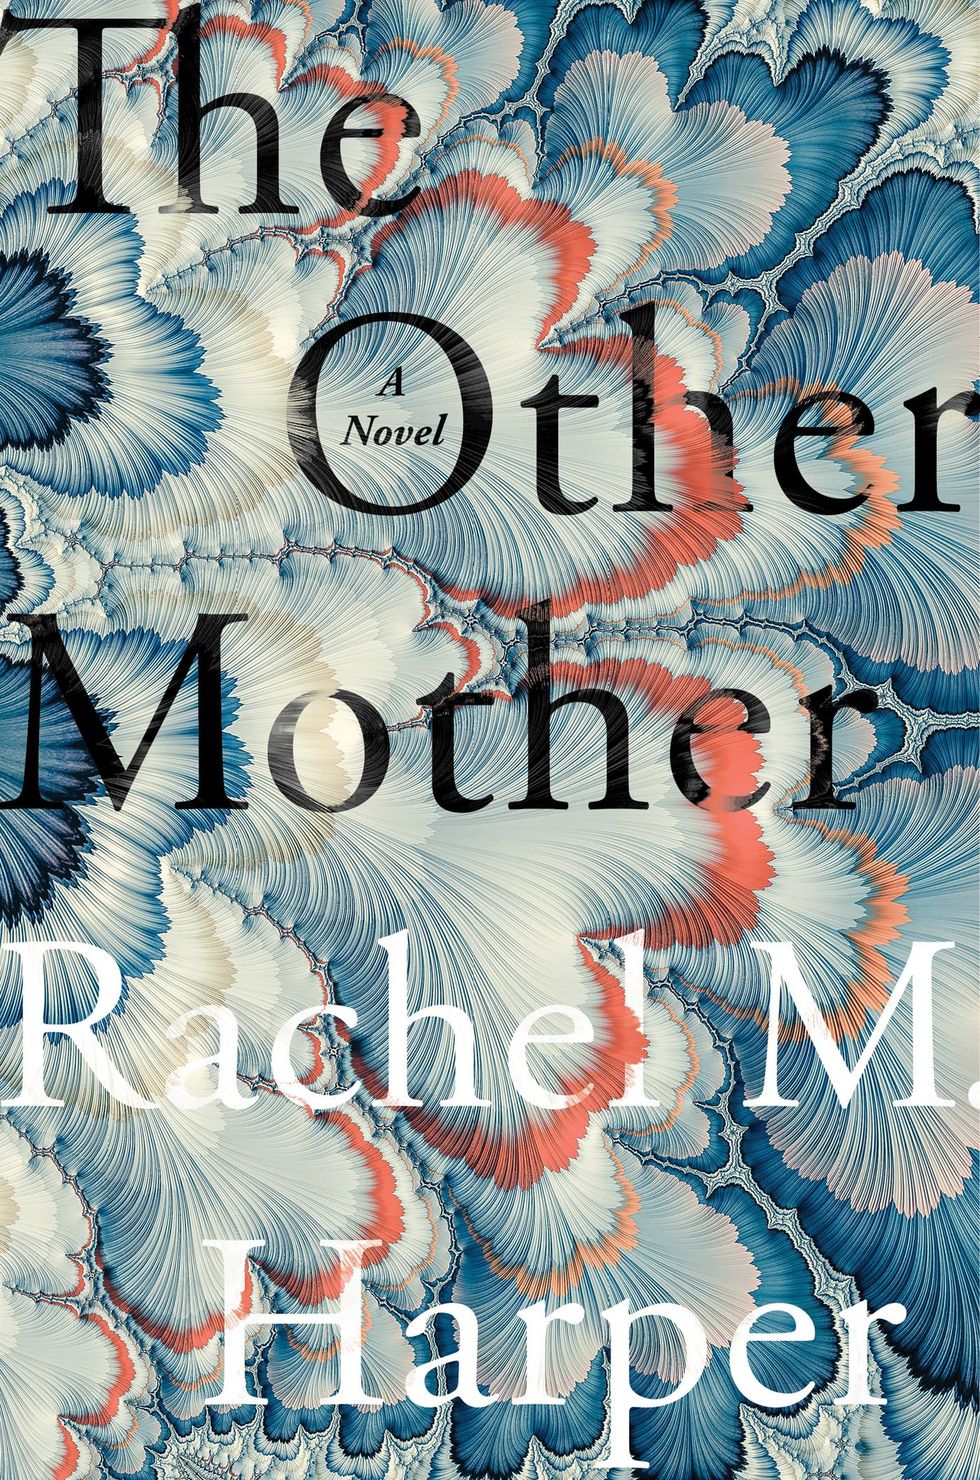 The Other Mother by Rachel M. Harper